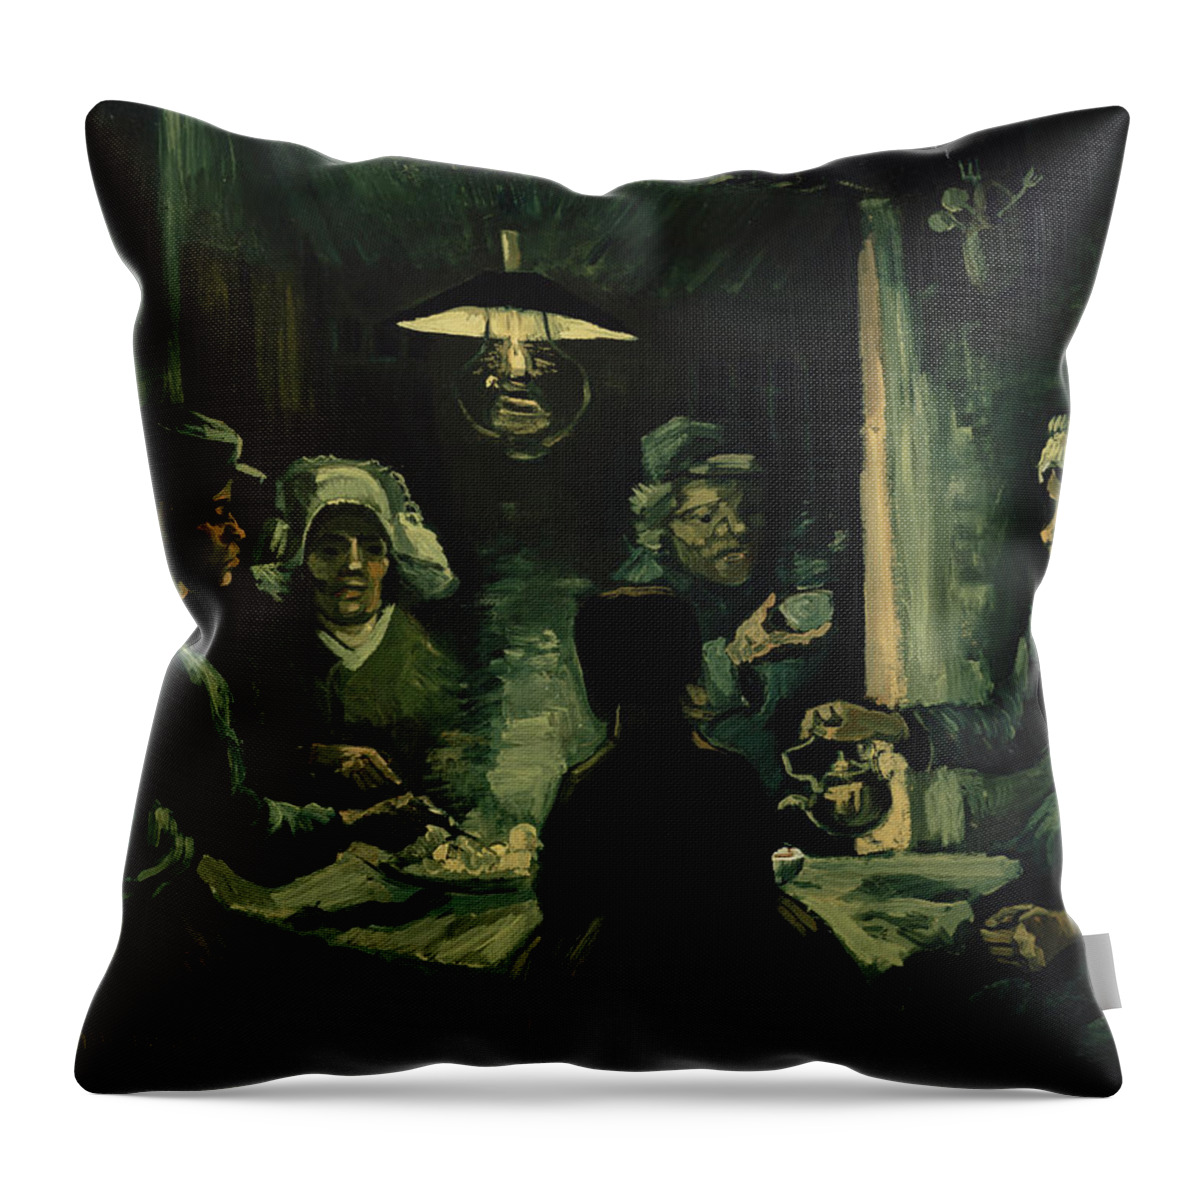 Vincent Van Gogh Throw Pillow featuring the painting The Potato Eaters #3 by Vincent Van Gogh